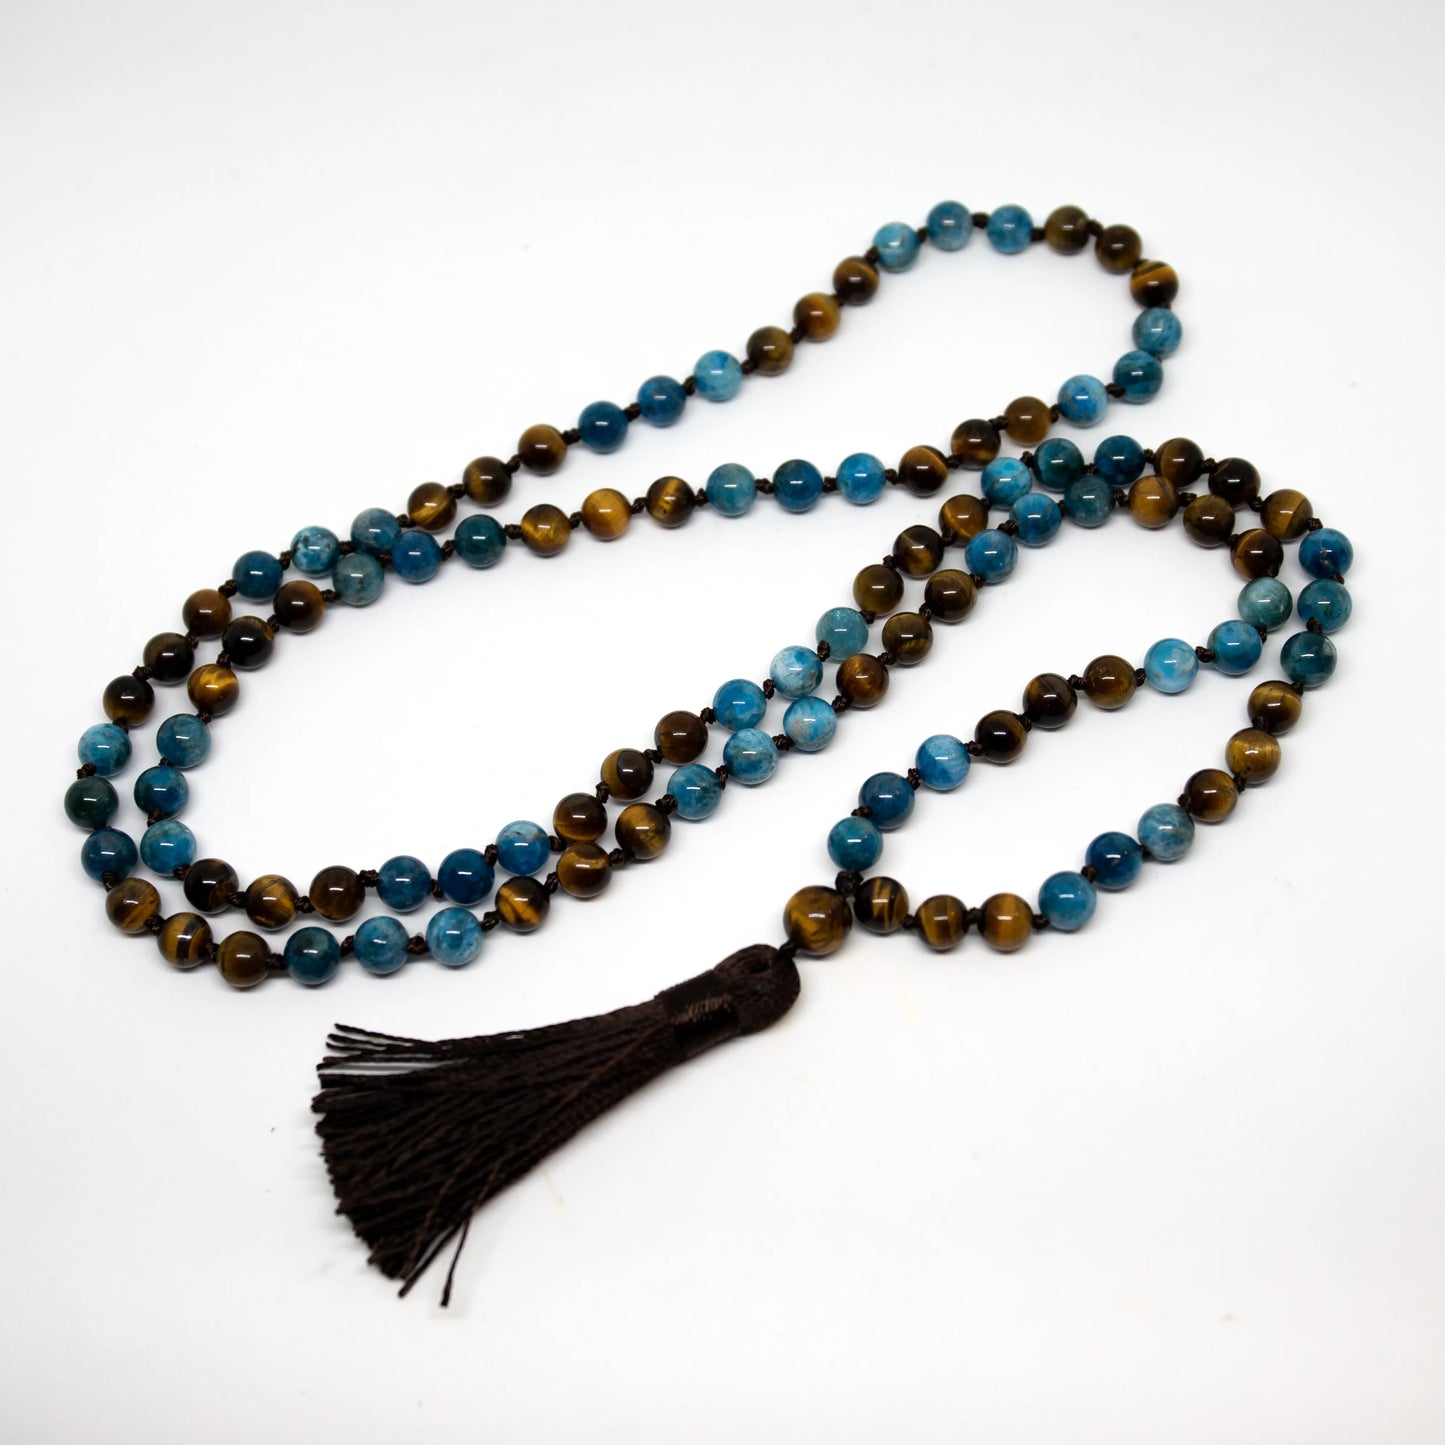 Apatite & Tiger's Eye Knotted 108 Bead Mala - 8mm (1 Pack)